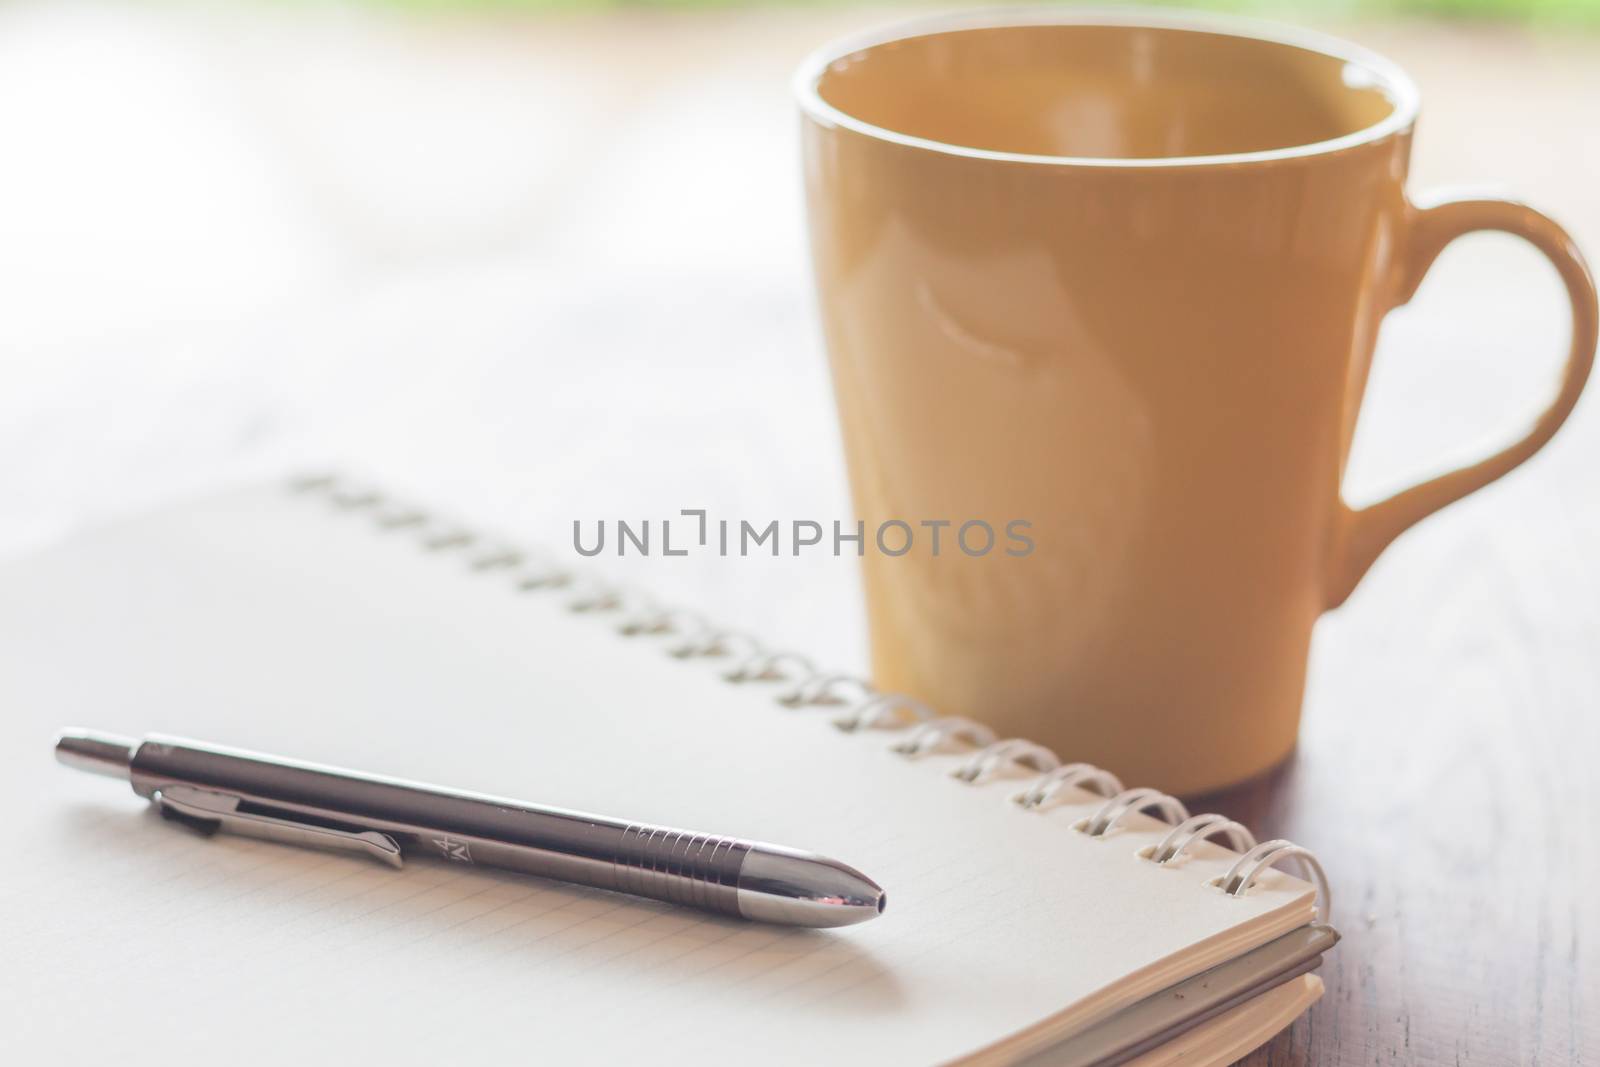 Pen and notebook with coffee mug, stock photo